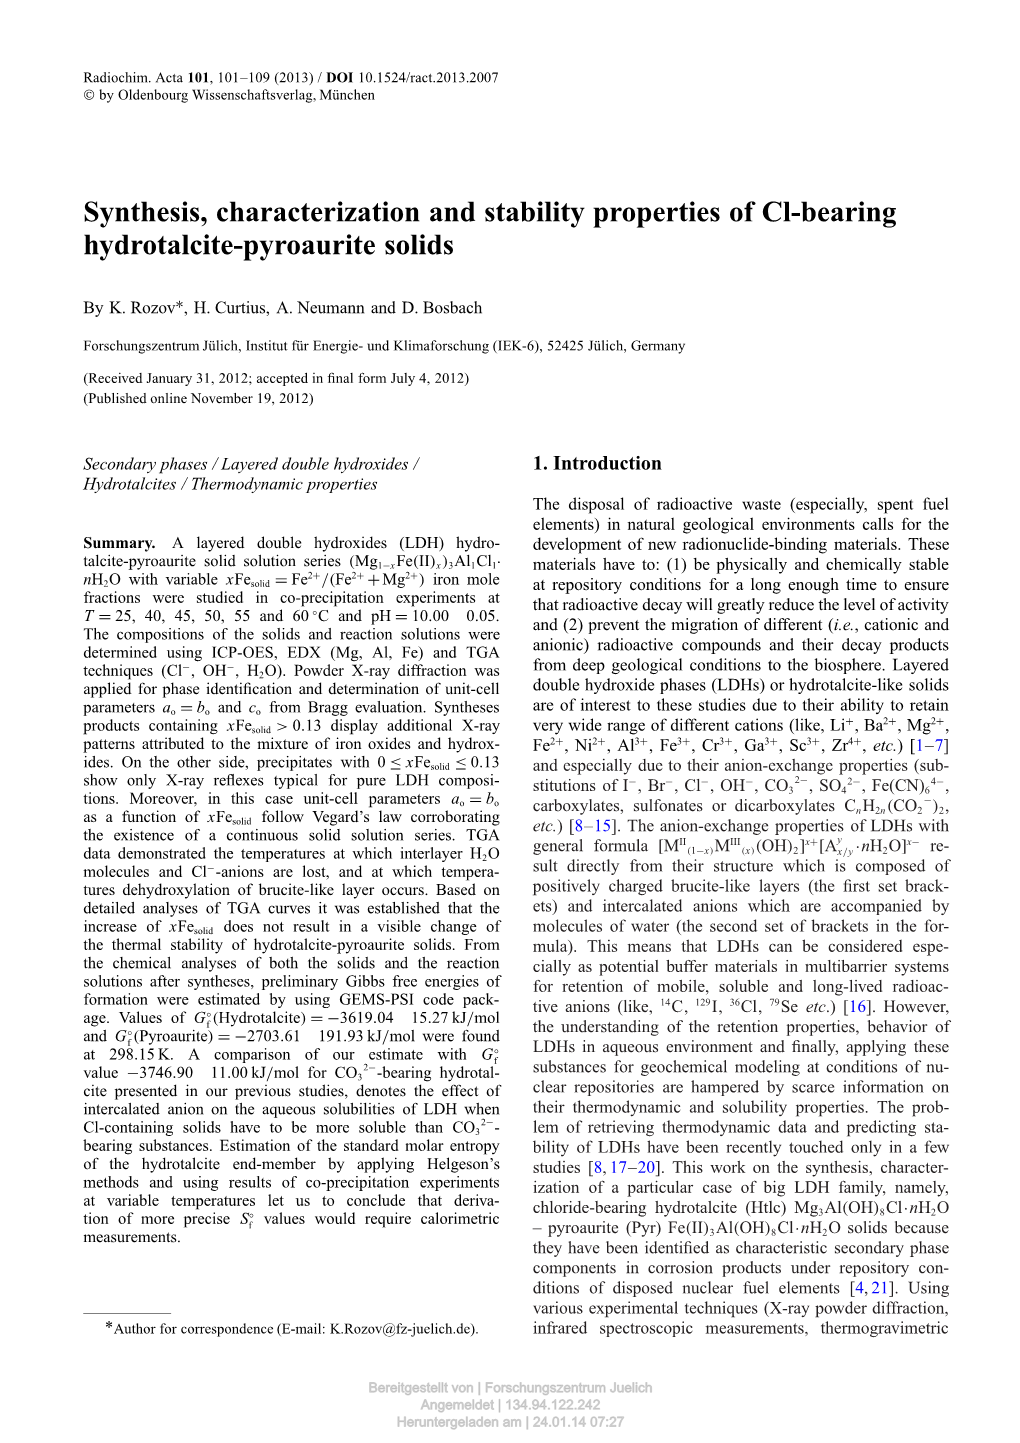 Synthesis, Characterization and Stability Properties of Cl-Bearing Hydrotalcite-Pyroaurite Solids